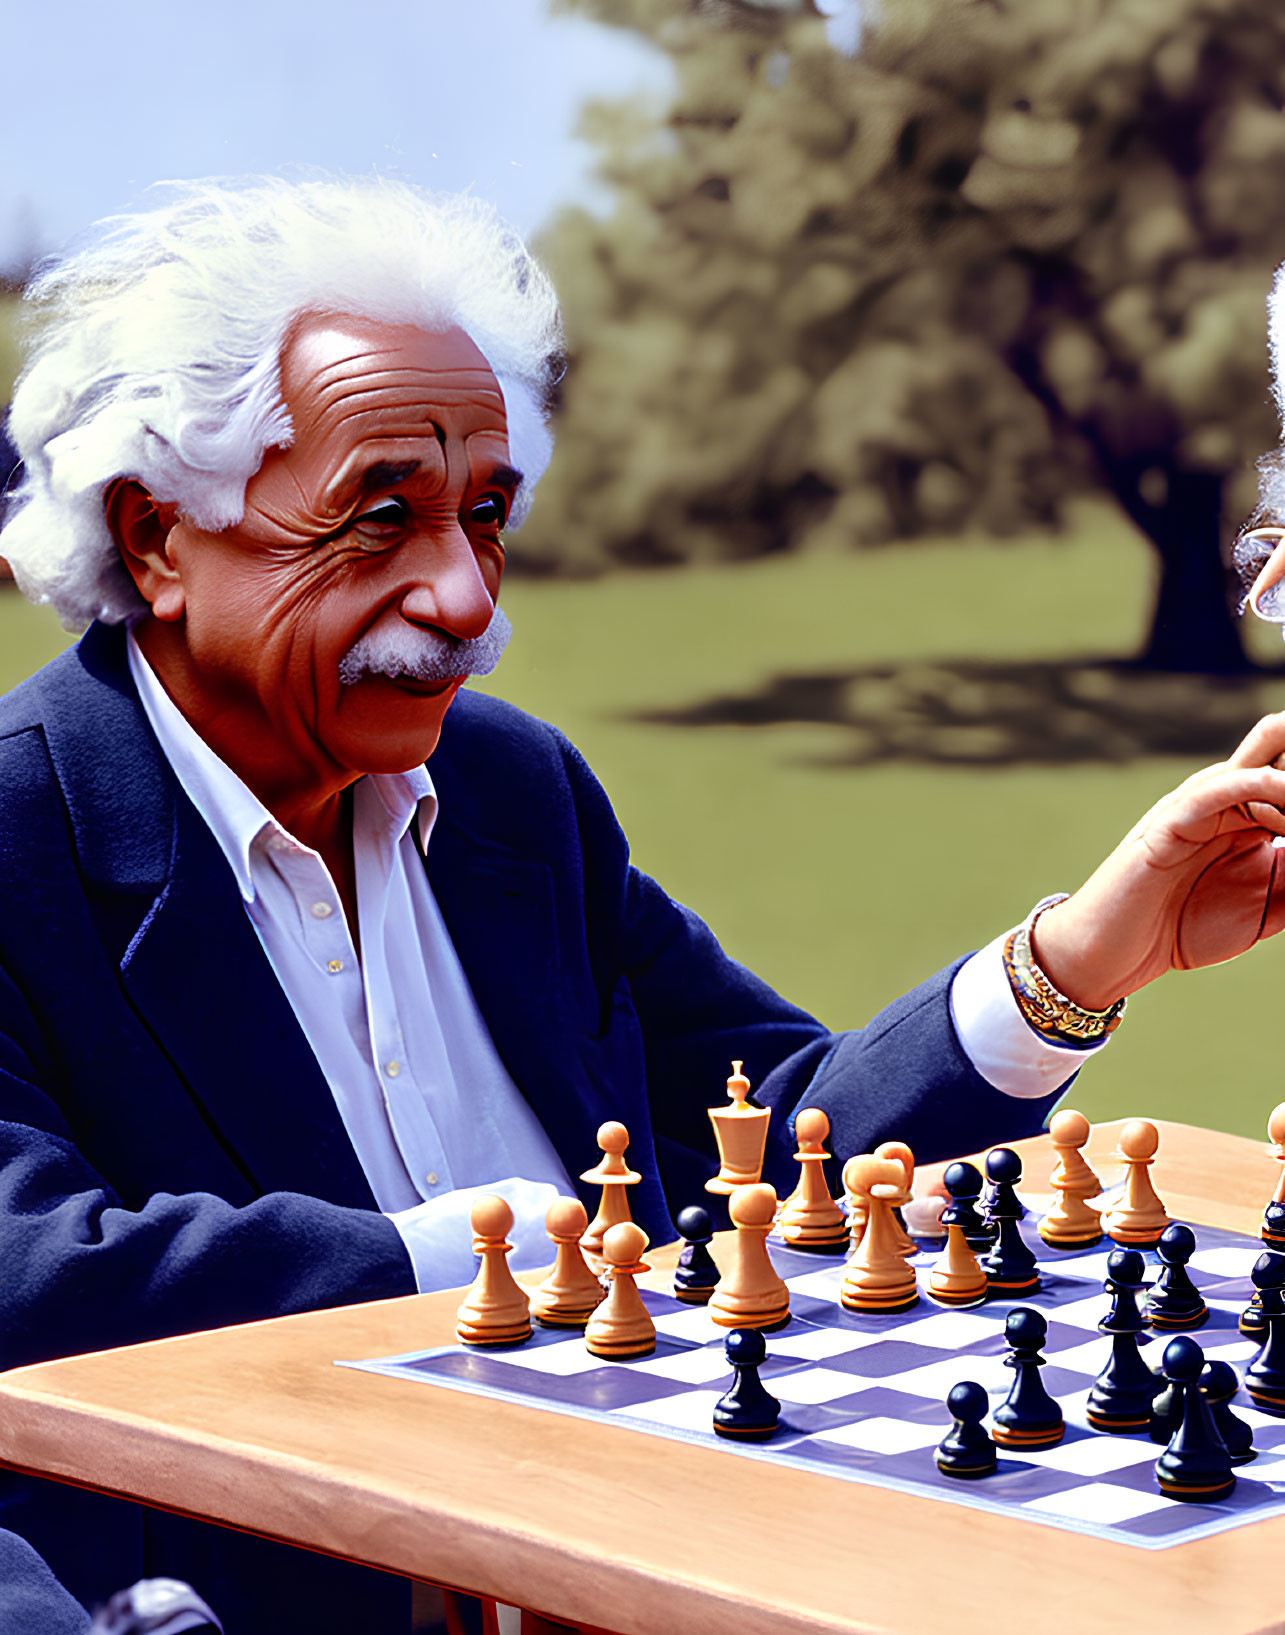 Elderly person with white hair playing chess in park